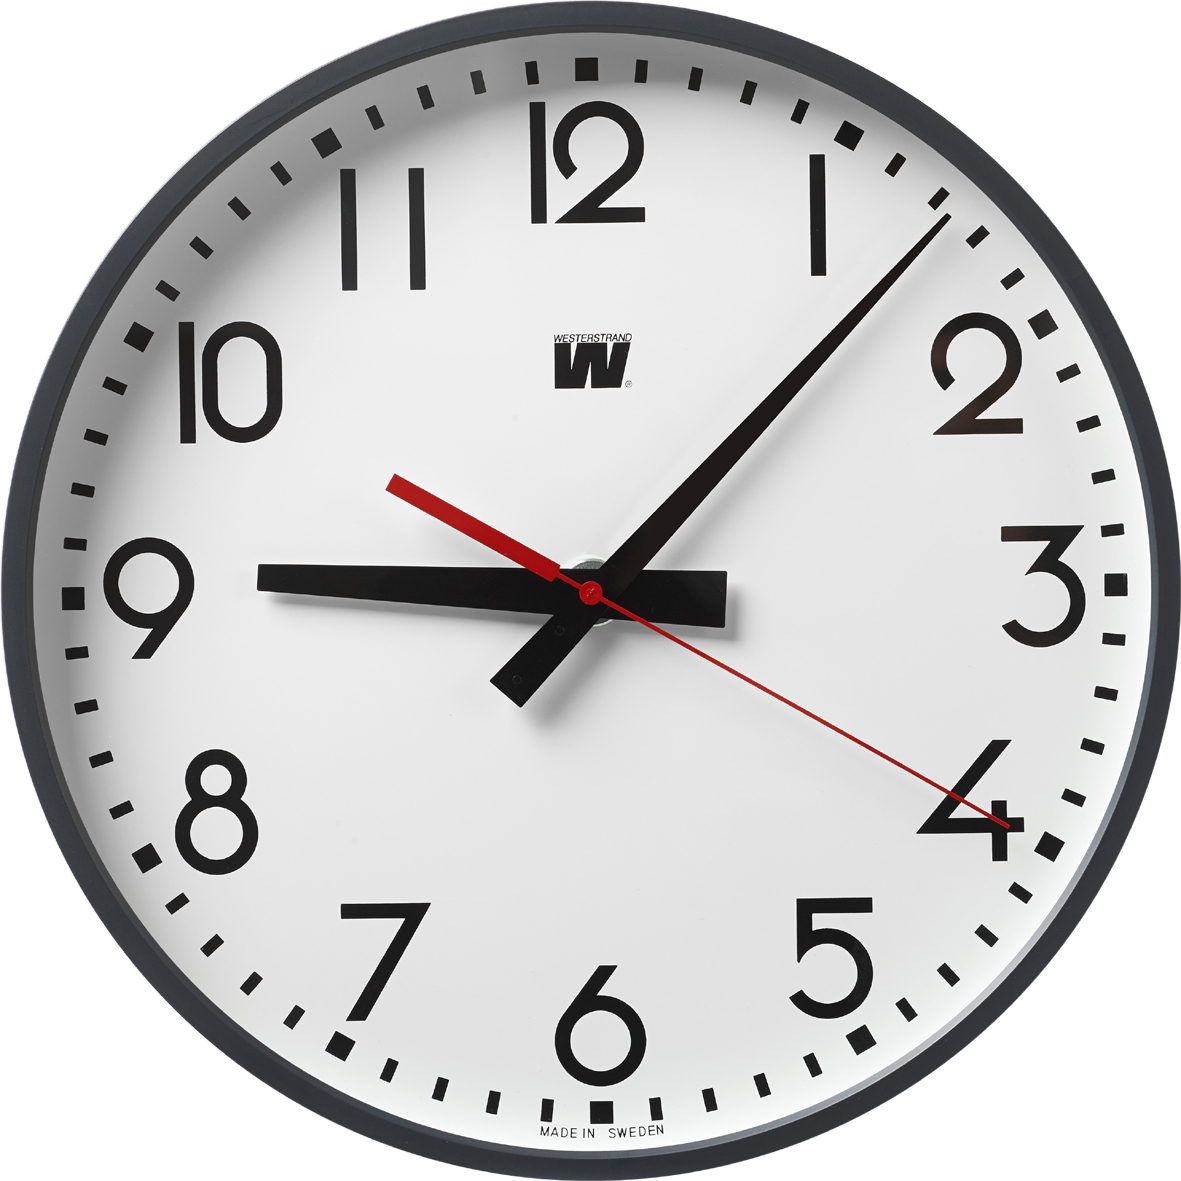 timer clock with seconds